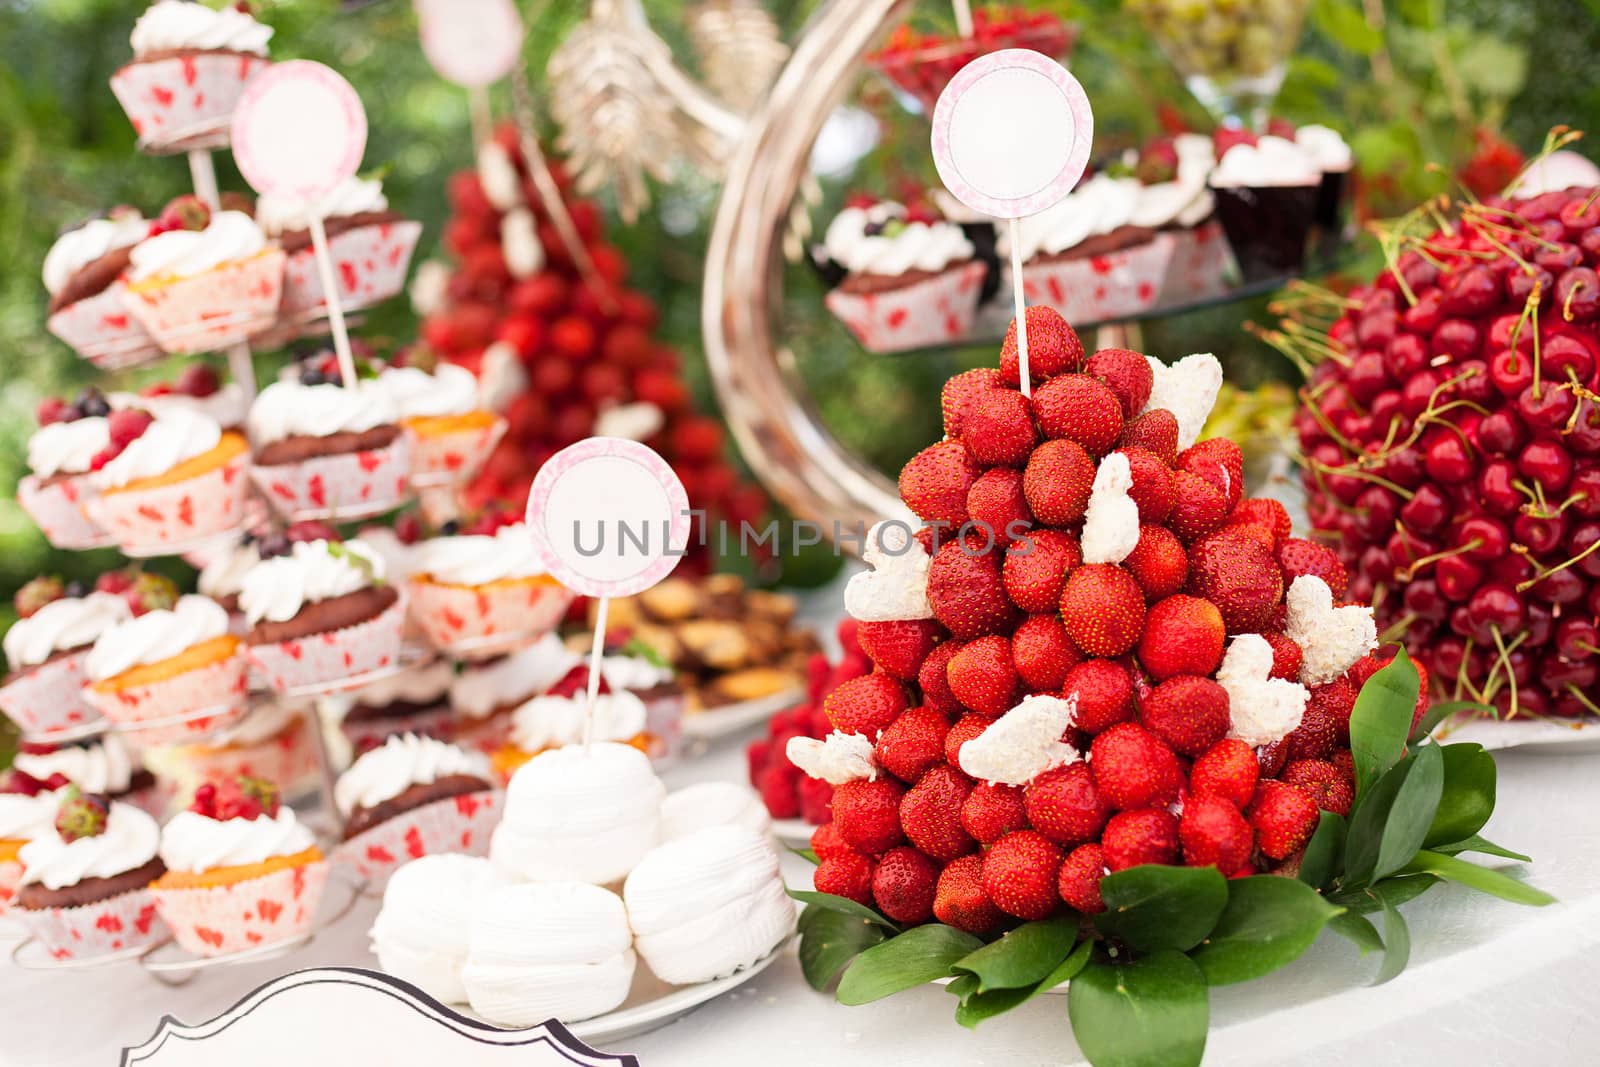 Sweet bar with cupcakes, fresh strawberries, and cherries